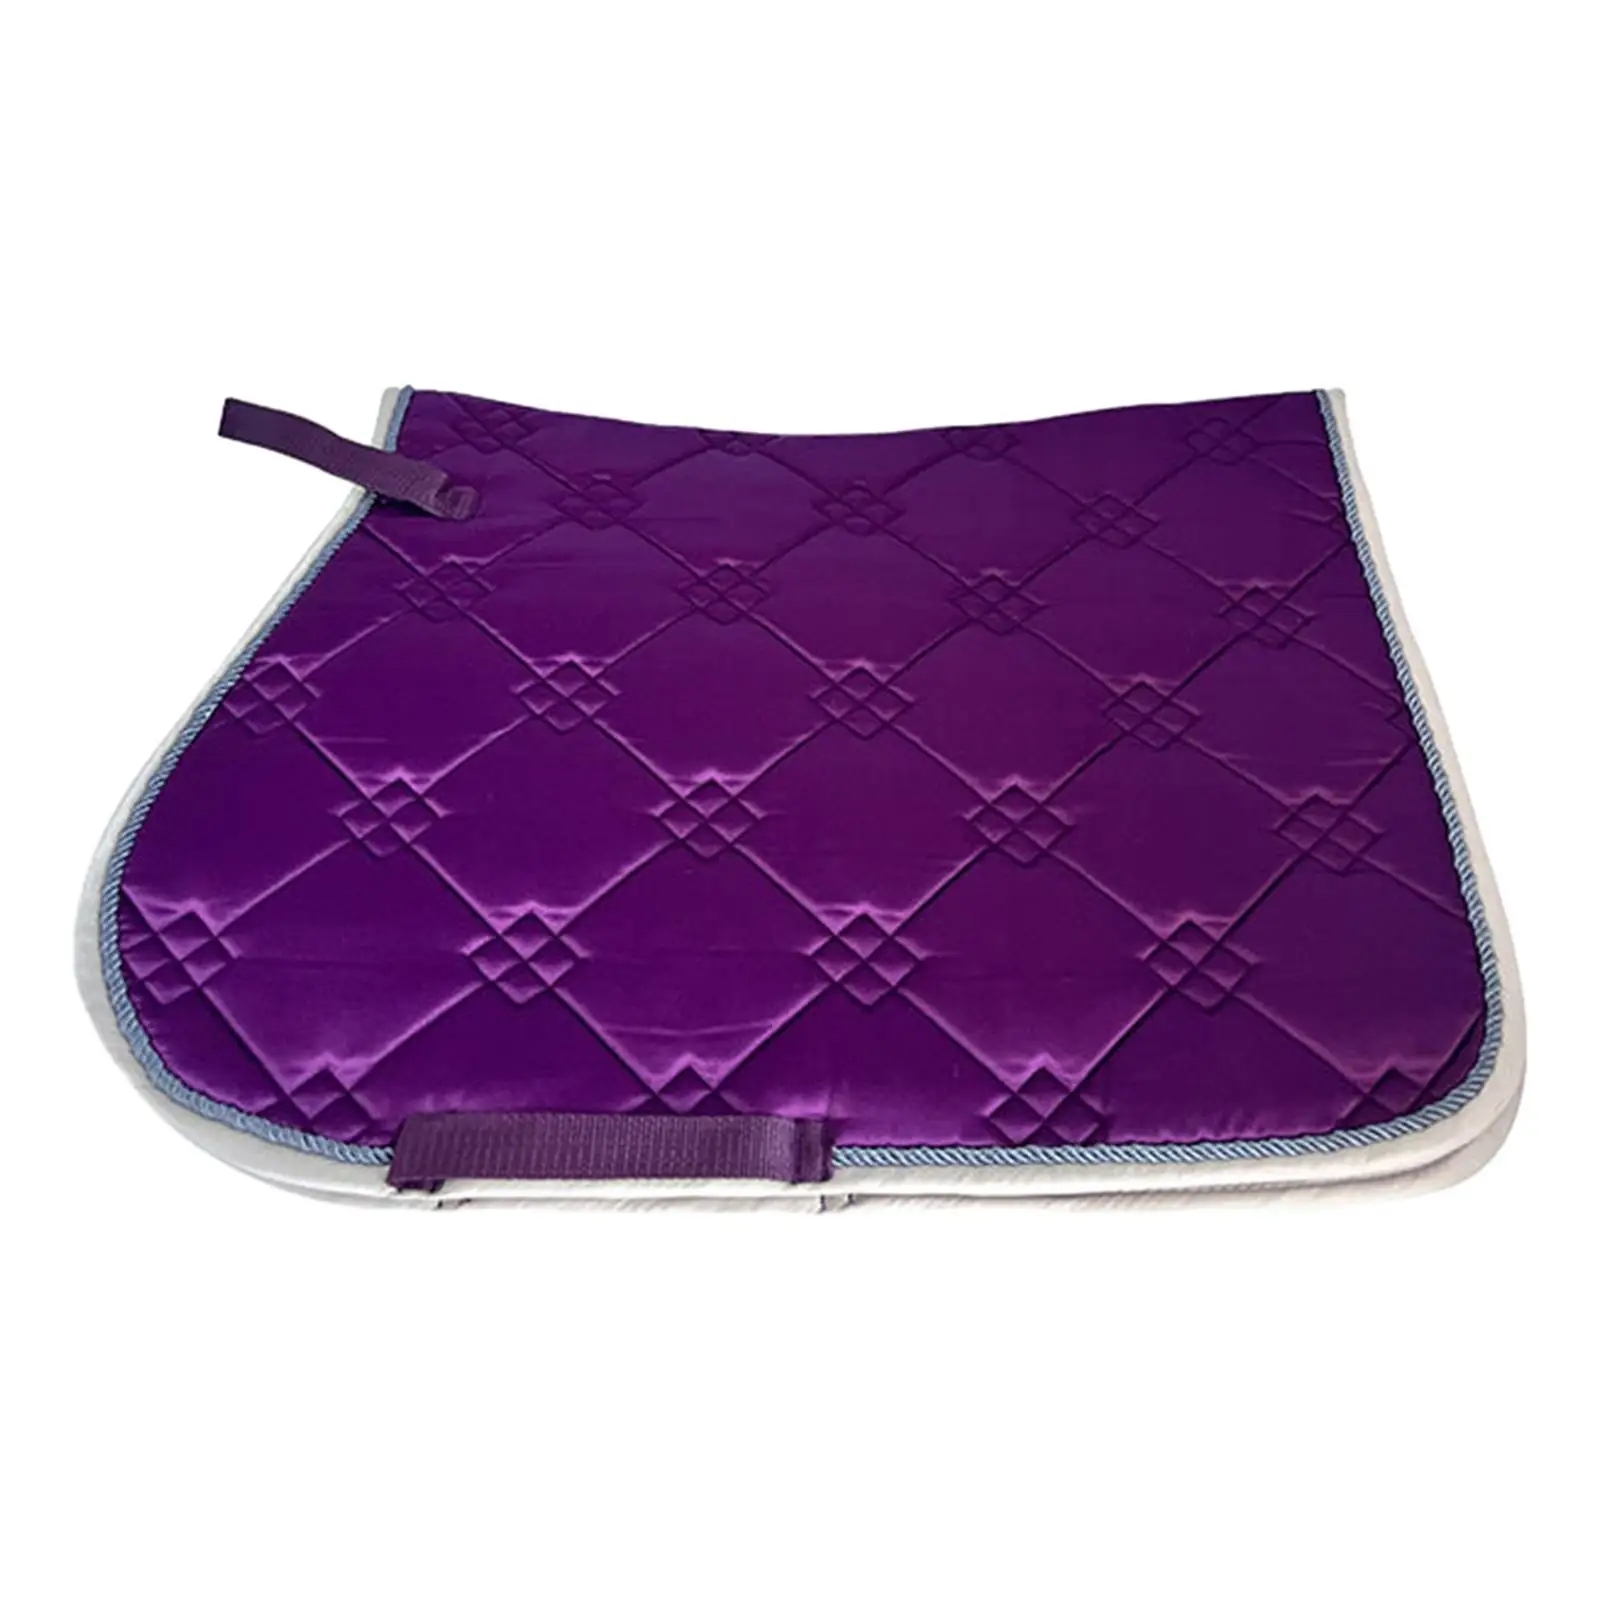 Saddle Pad for Horse Equestrian Riding Equipment Sports Riding Soft Nonslip Protector Portable Breathable Dressage Pad